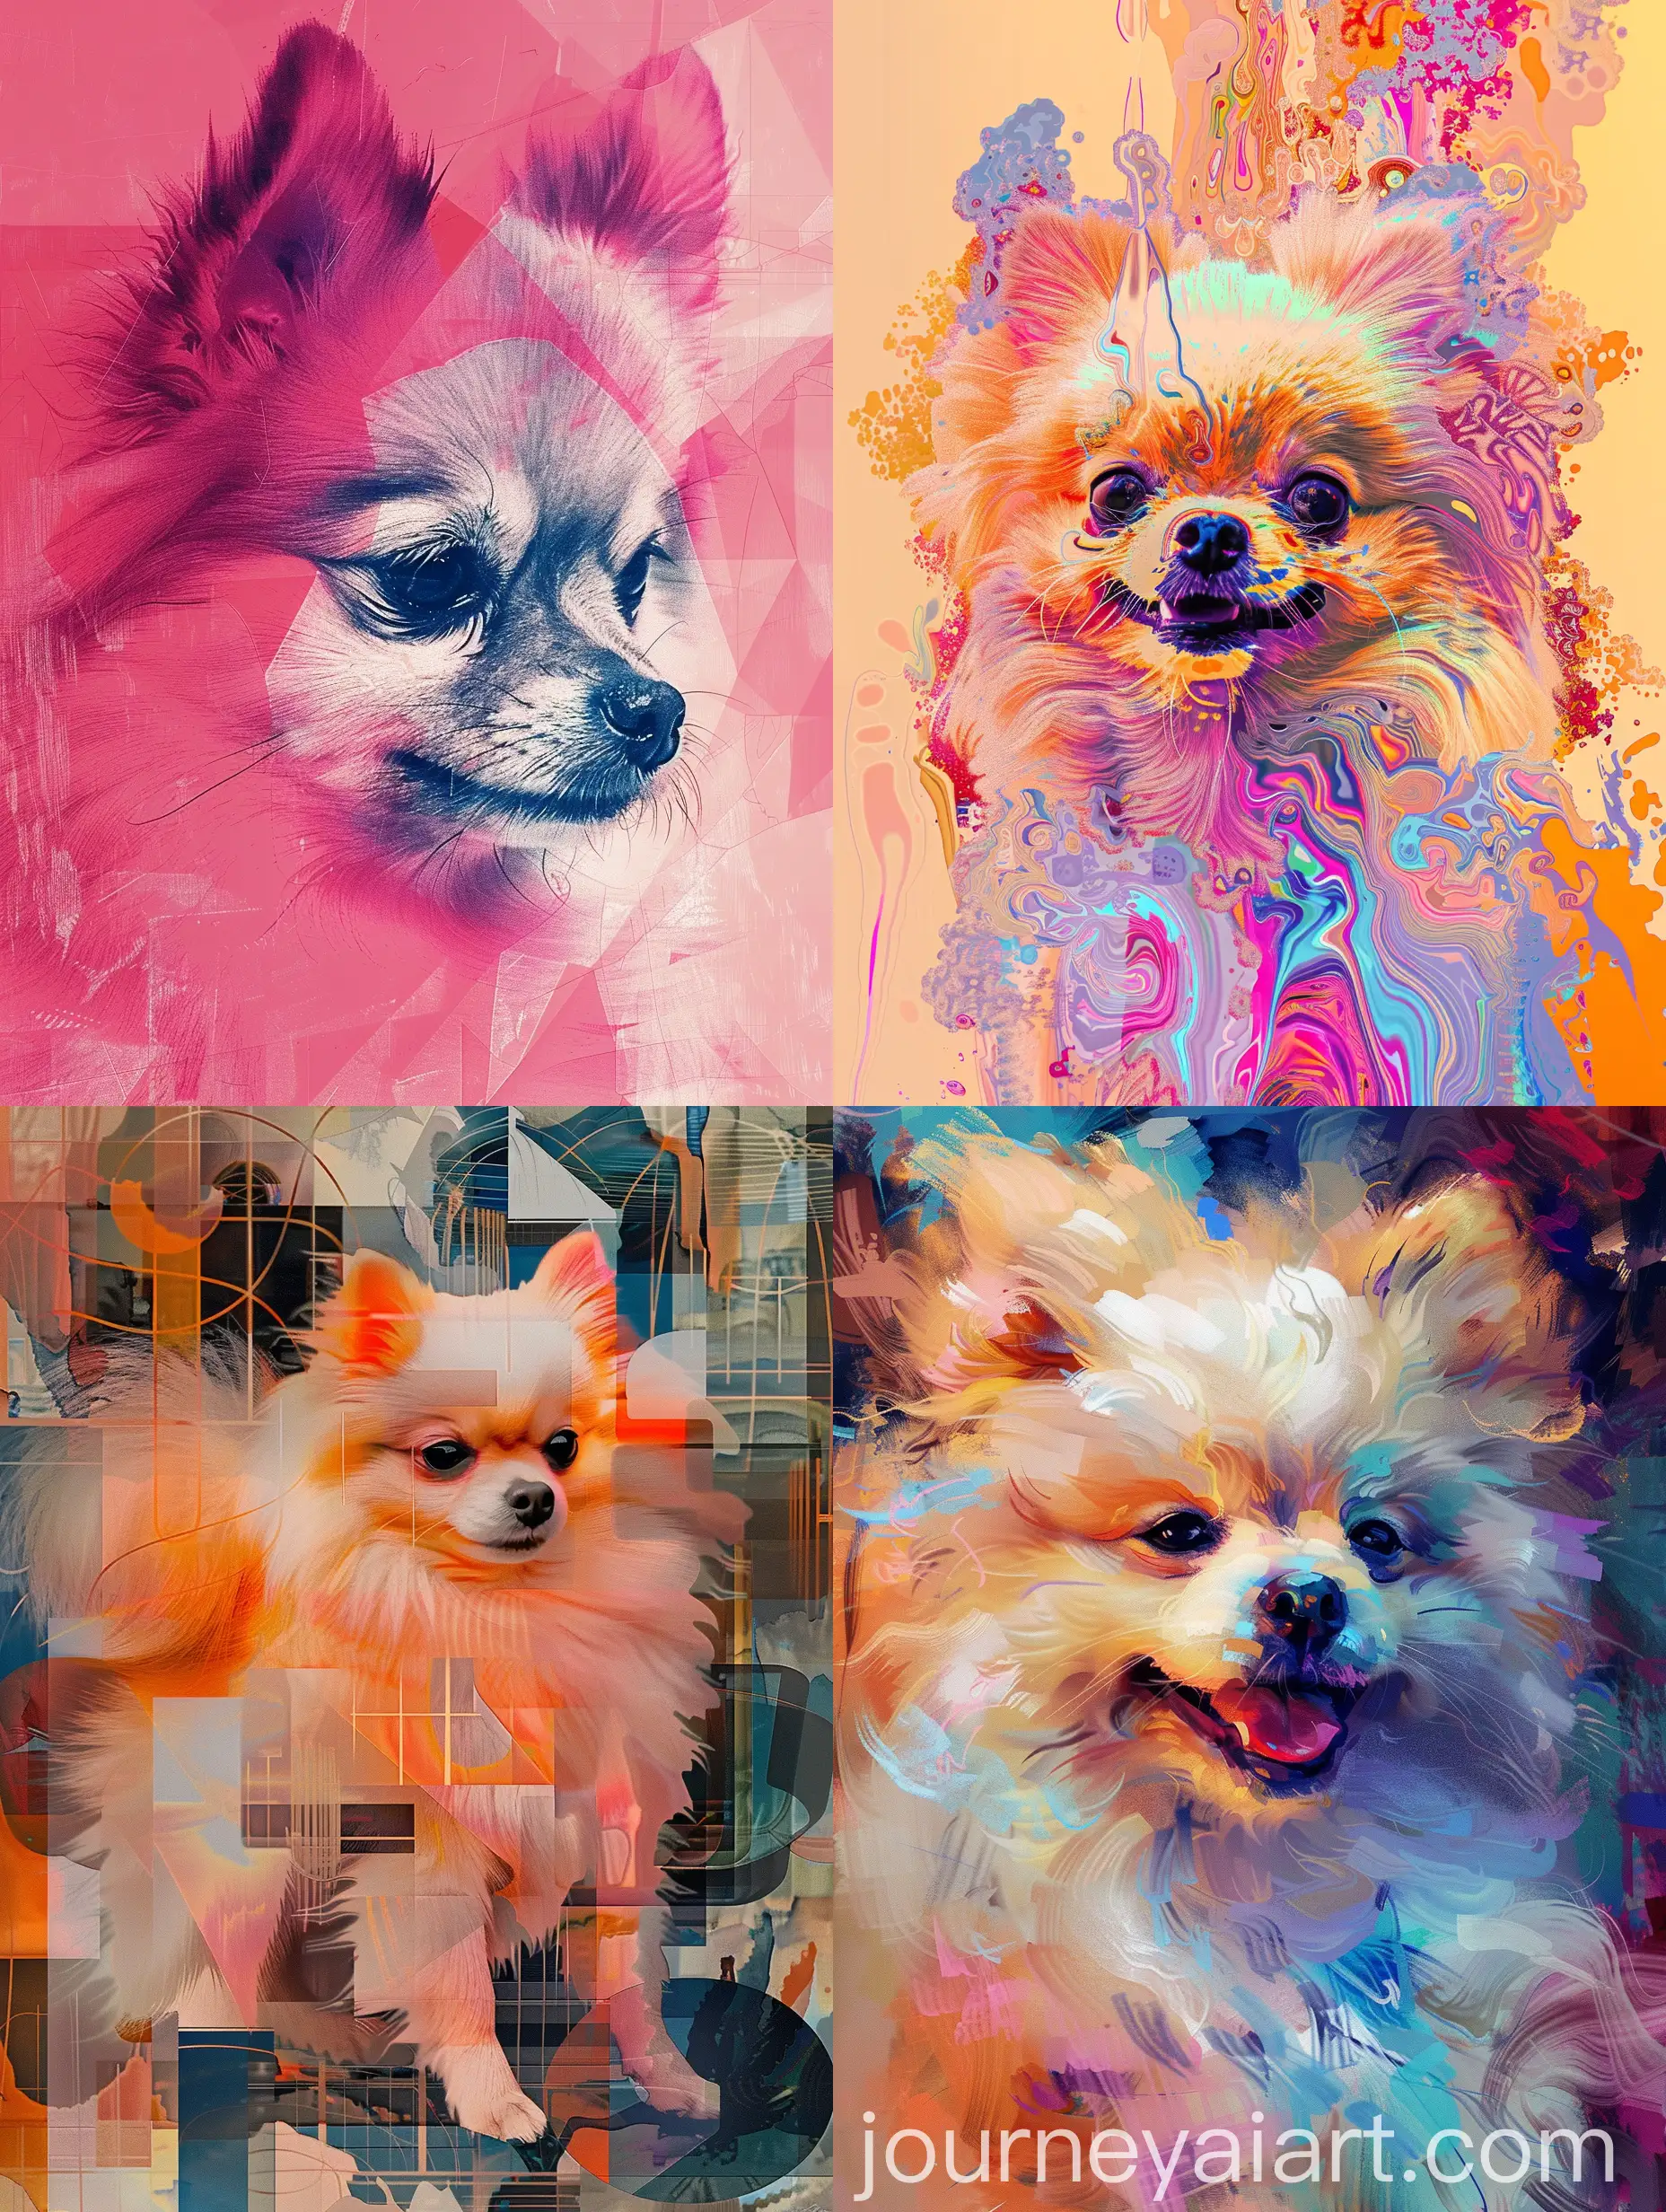 Abstract-Art-AwardWinning-Physically-Based-Render-with-Fairy-Kei-Aesthetic-and-Pomeranian-Puppy-Cosplay